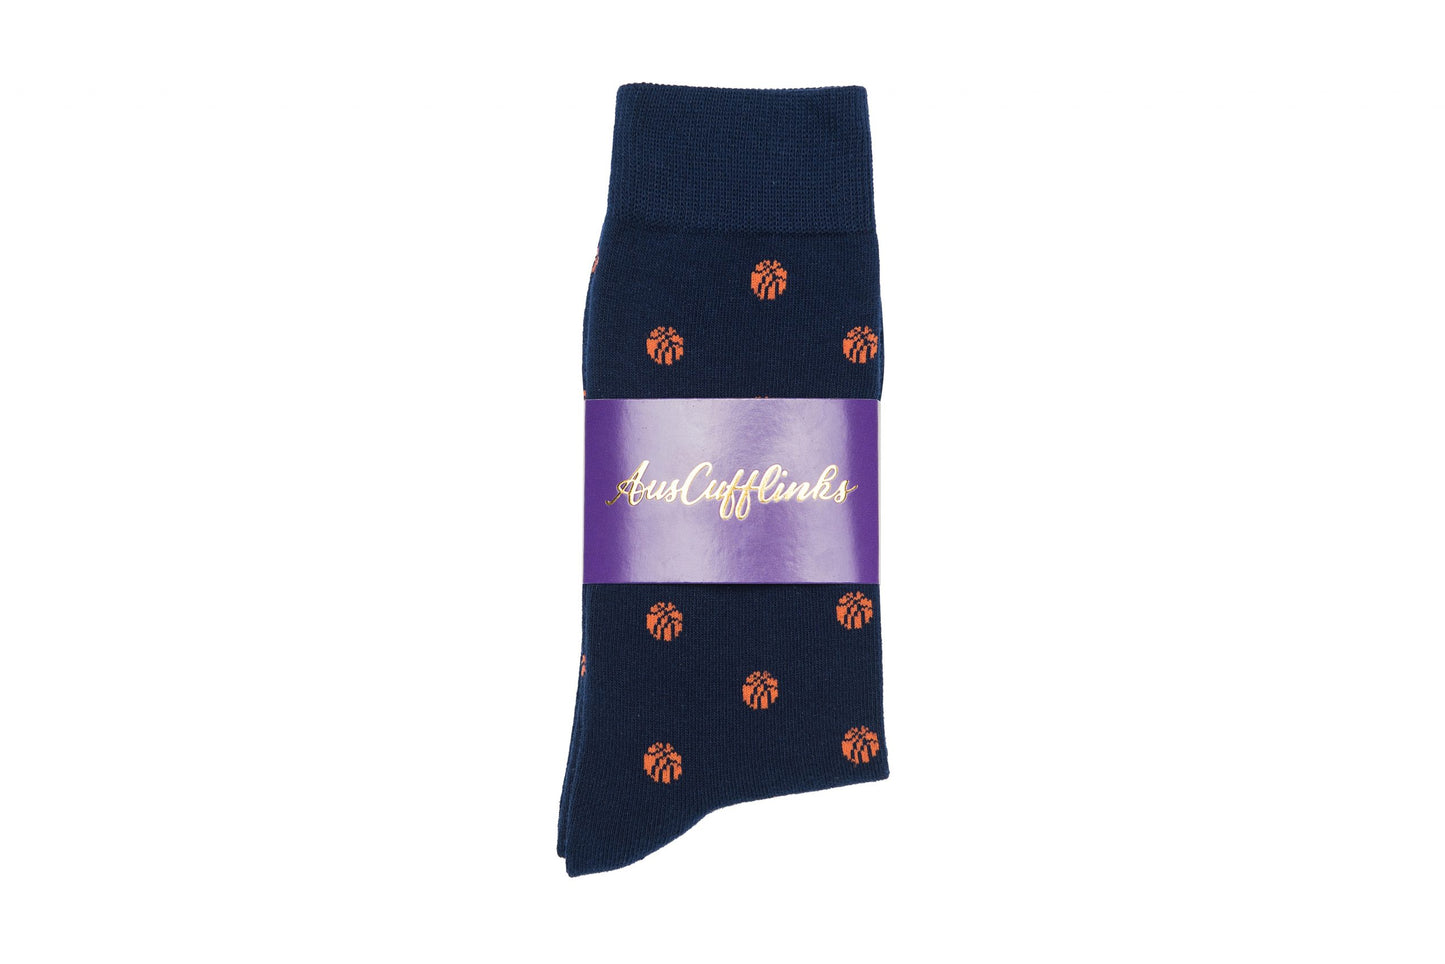 A pair of Basketball Socks with navy blue, orange, and black polka dots.